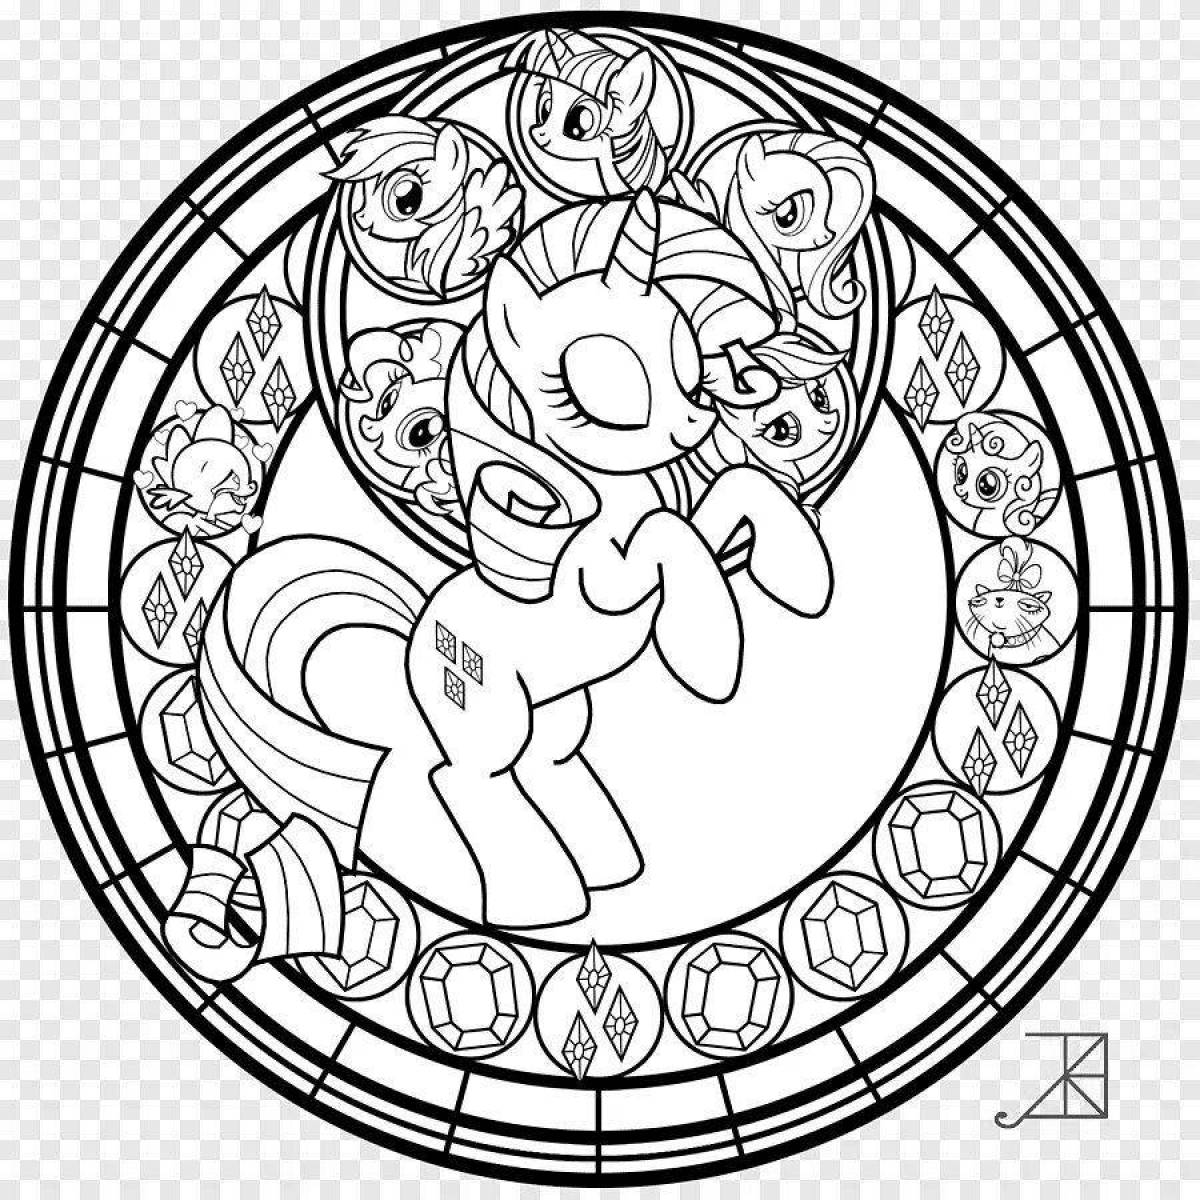 Delightful coloring pony magical